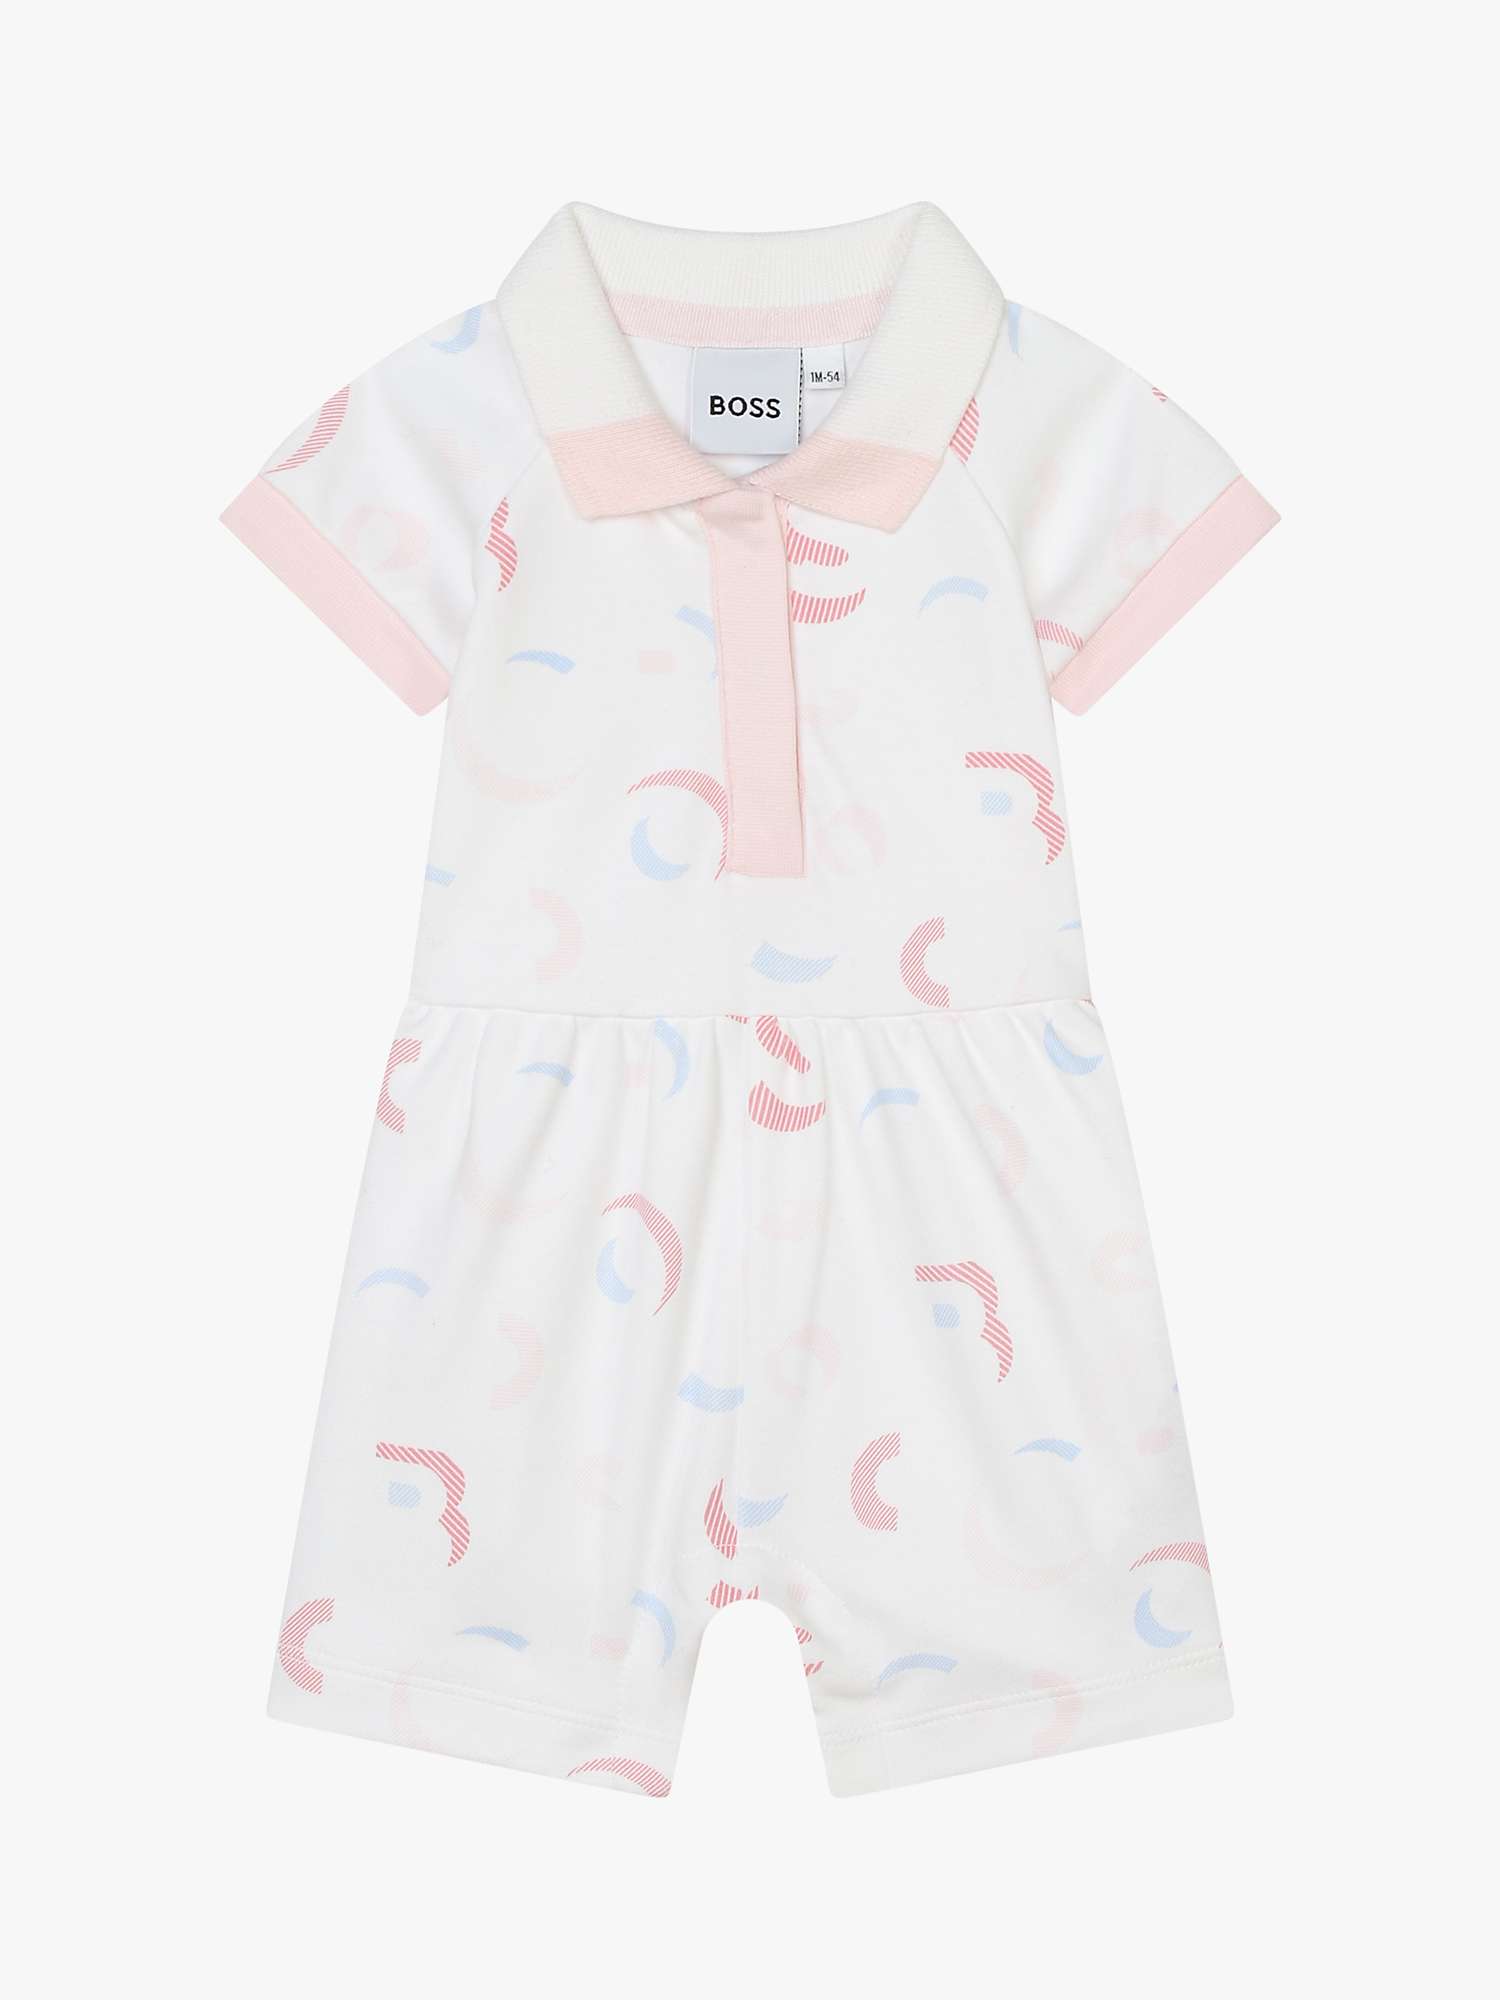 Buy BOSS Baby Polo Collar All In One, White Online at johnlewis.com